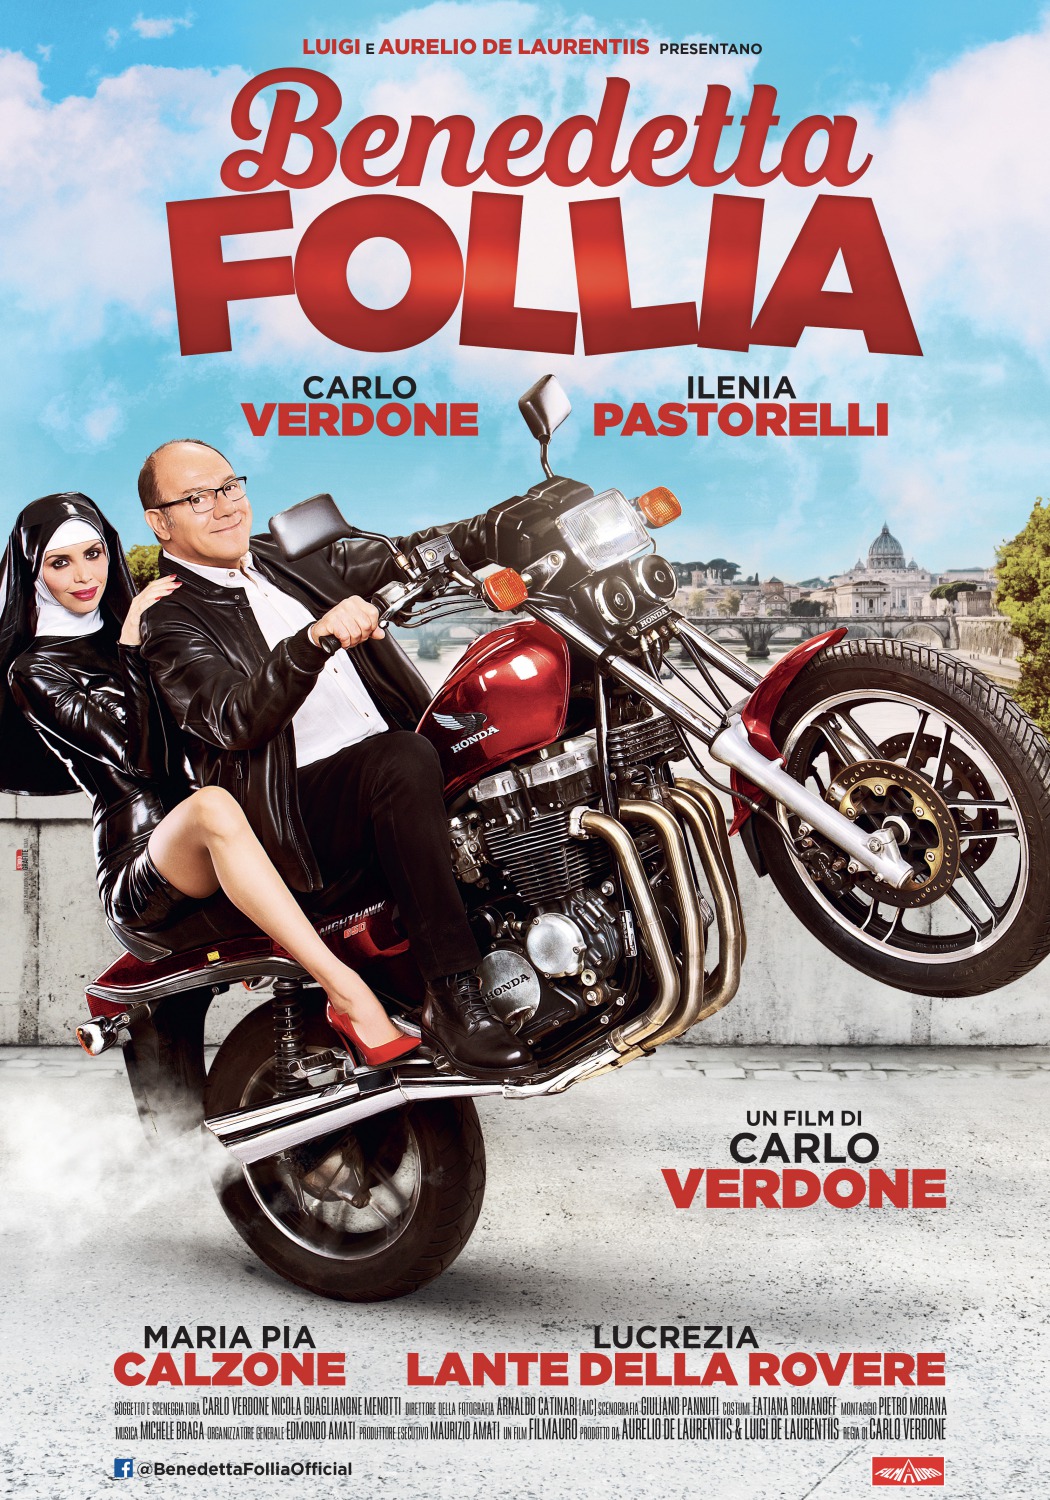 Extra Large Movie Poster Image for Benedetta follia 